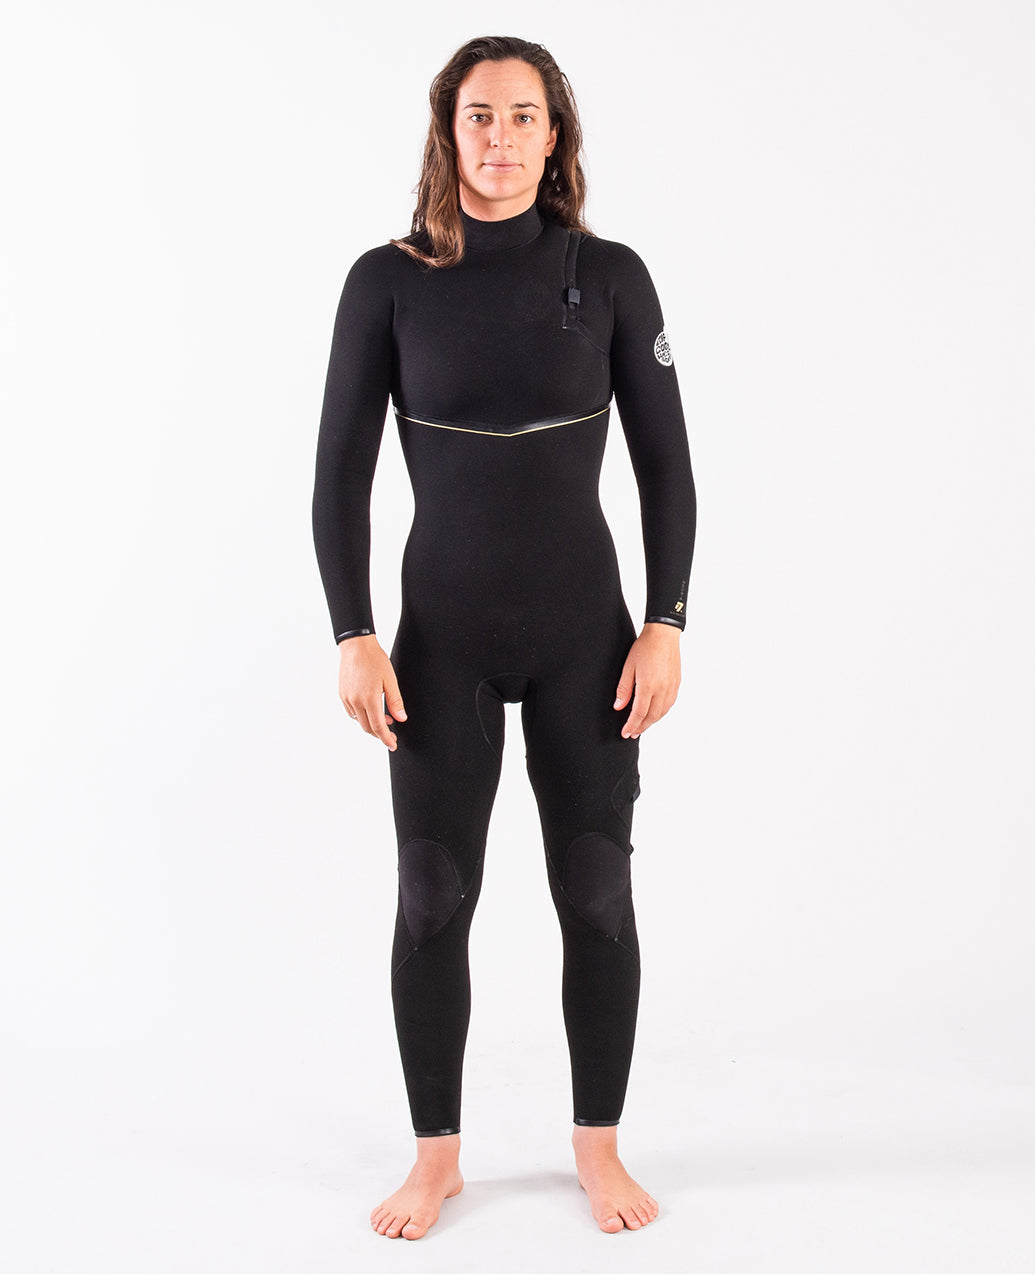 E7 Limited Edition E-Bomb 4/3 mm Zip Free Wetsuit Steamer